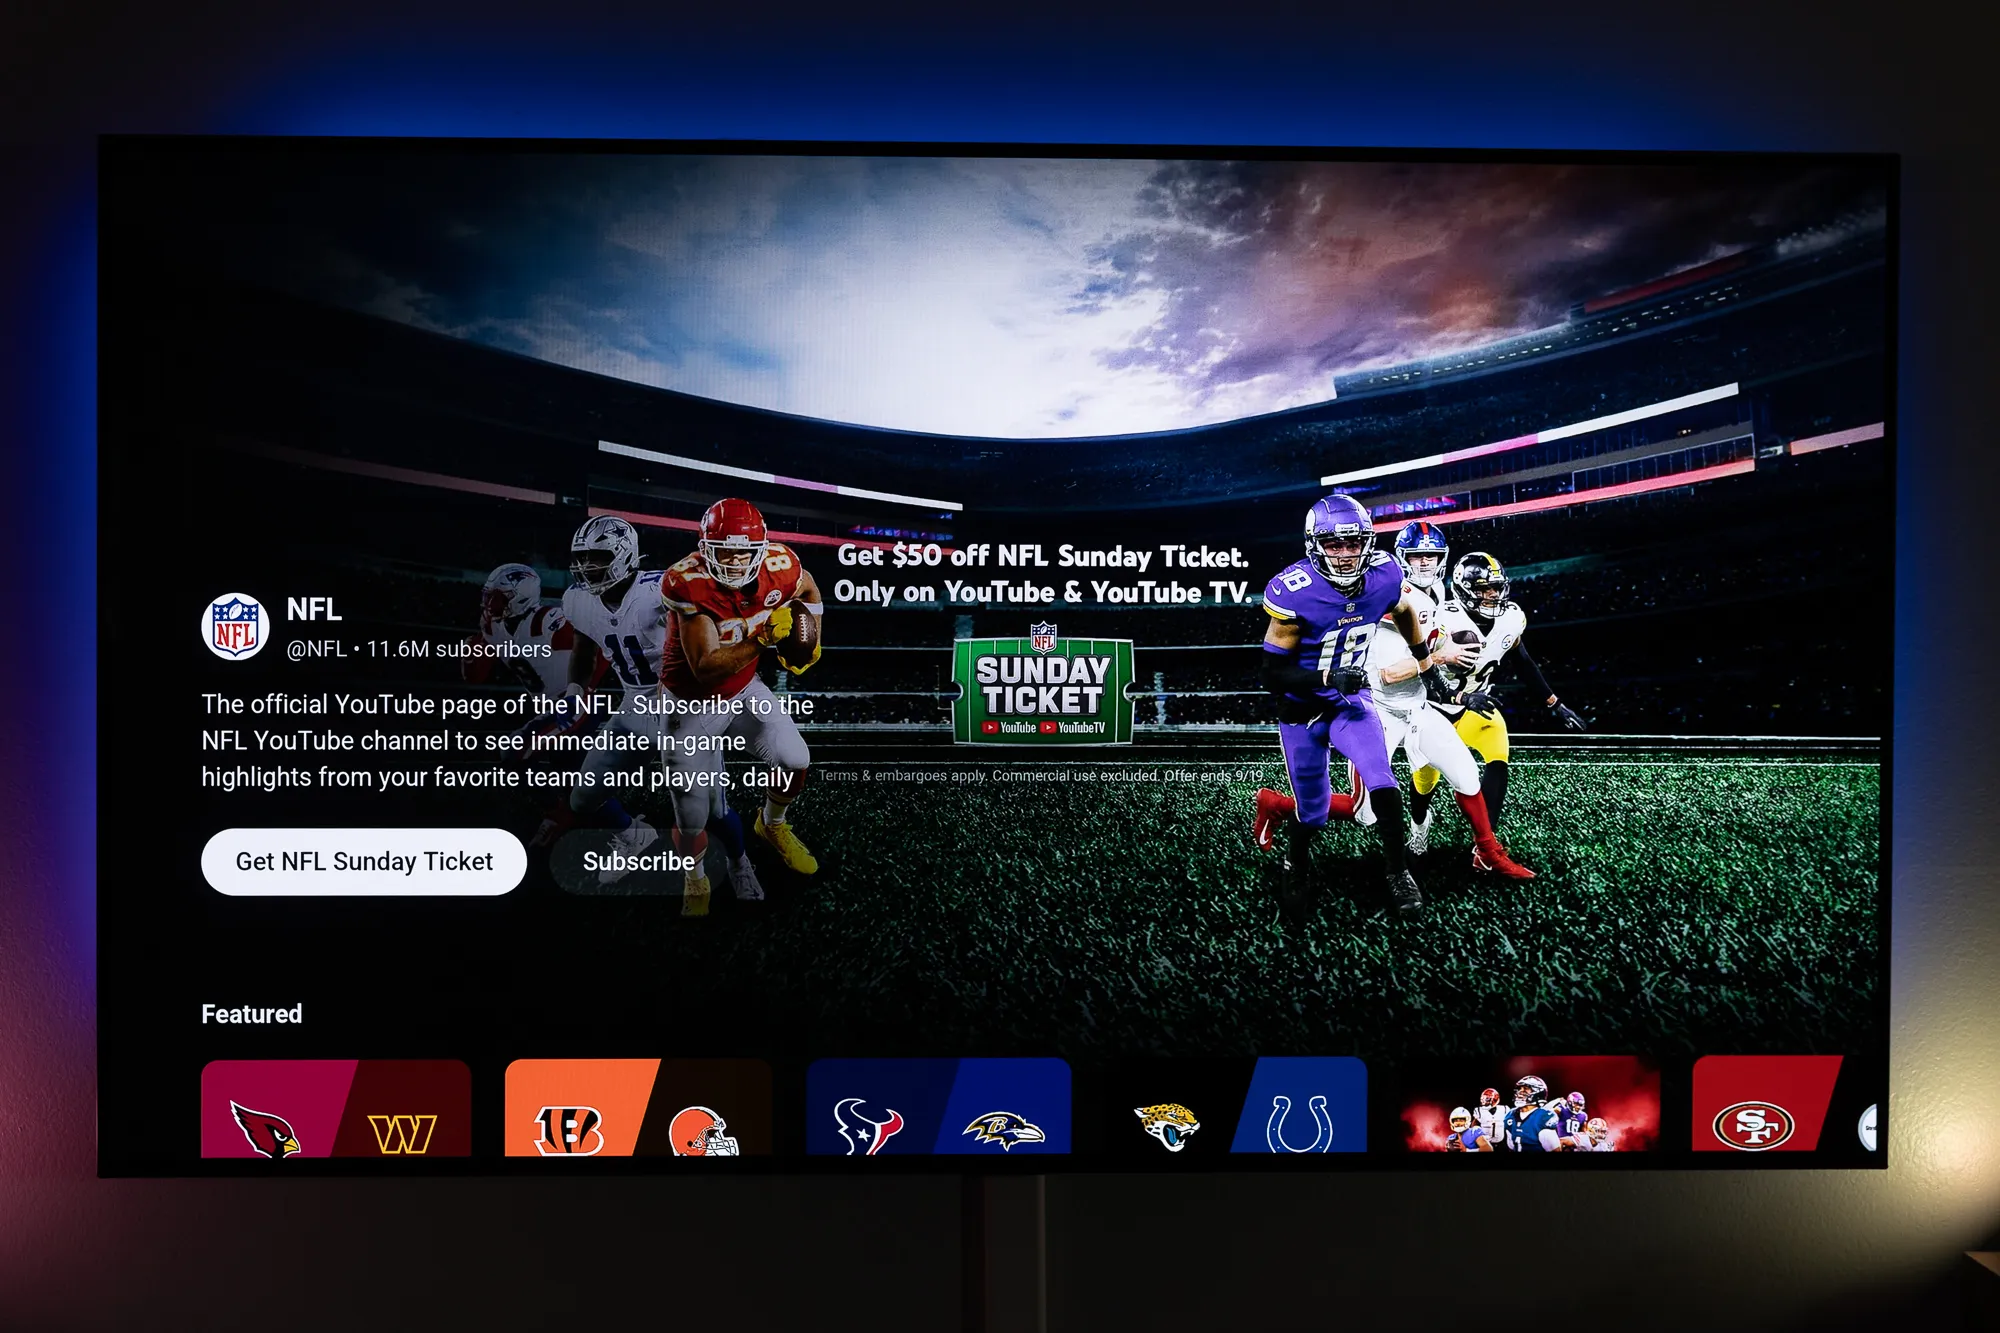 How To Download NFL Sunday Ticket On LG Smart TV